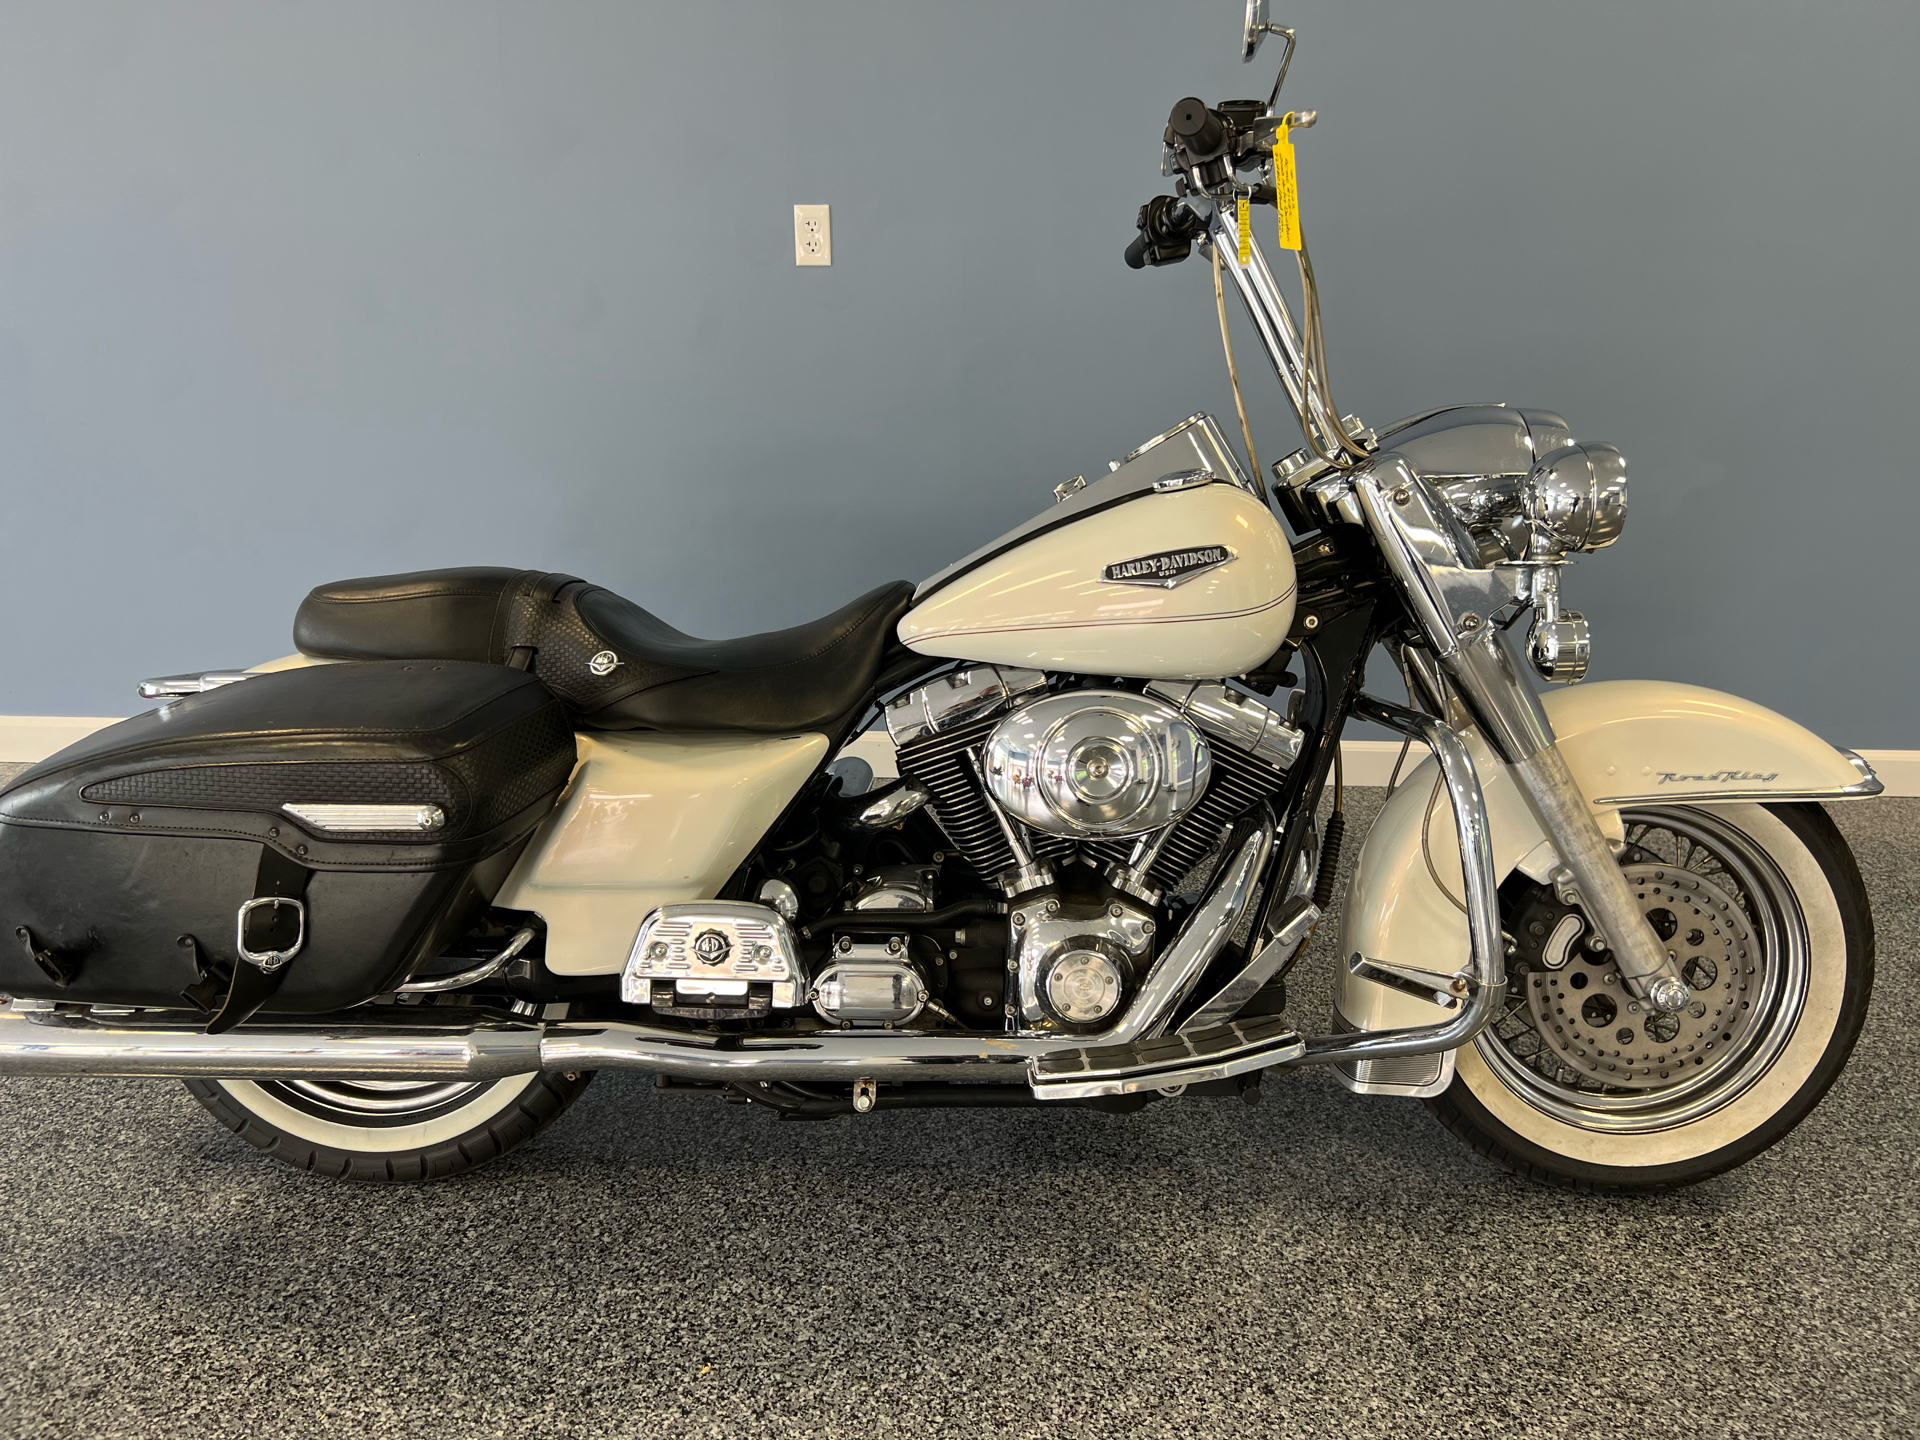 2002 Harley-Davidson FLHRCI Road King® Classic in Meredith, New Hampshire - Photo 1